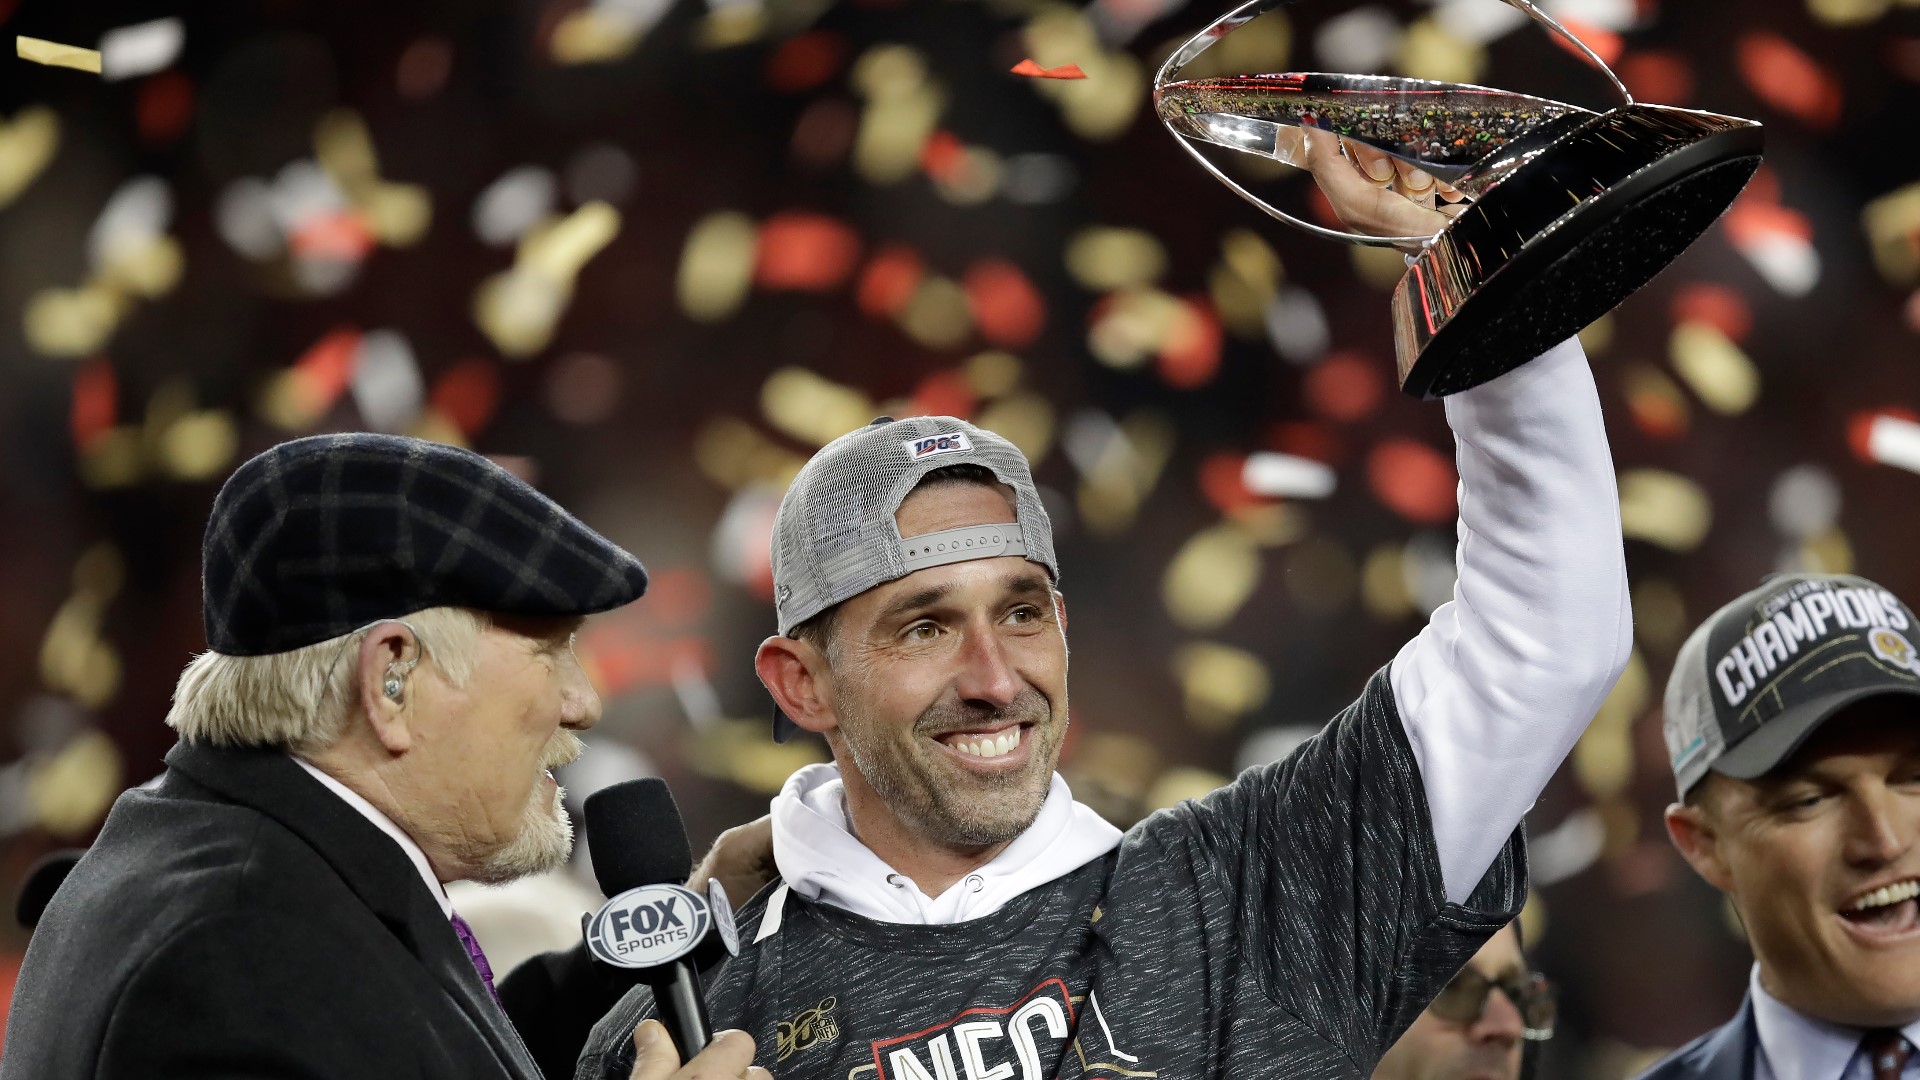 Kyle Shanahan is the head coach of the San Francisco 49ers, but in the 2017 championship game, he was the offensive coordinator for the Falcons.